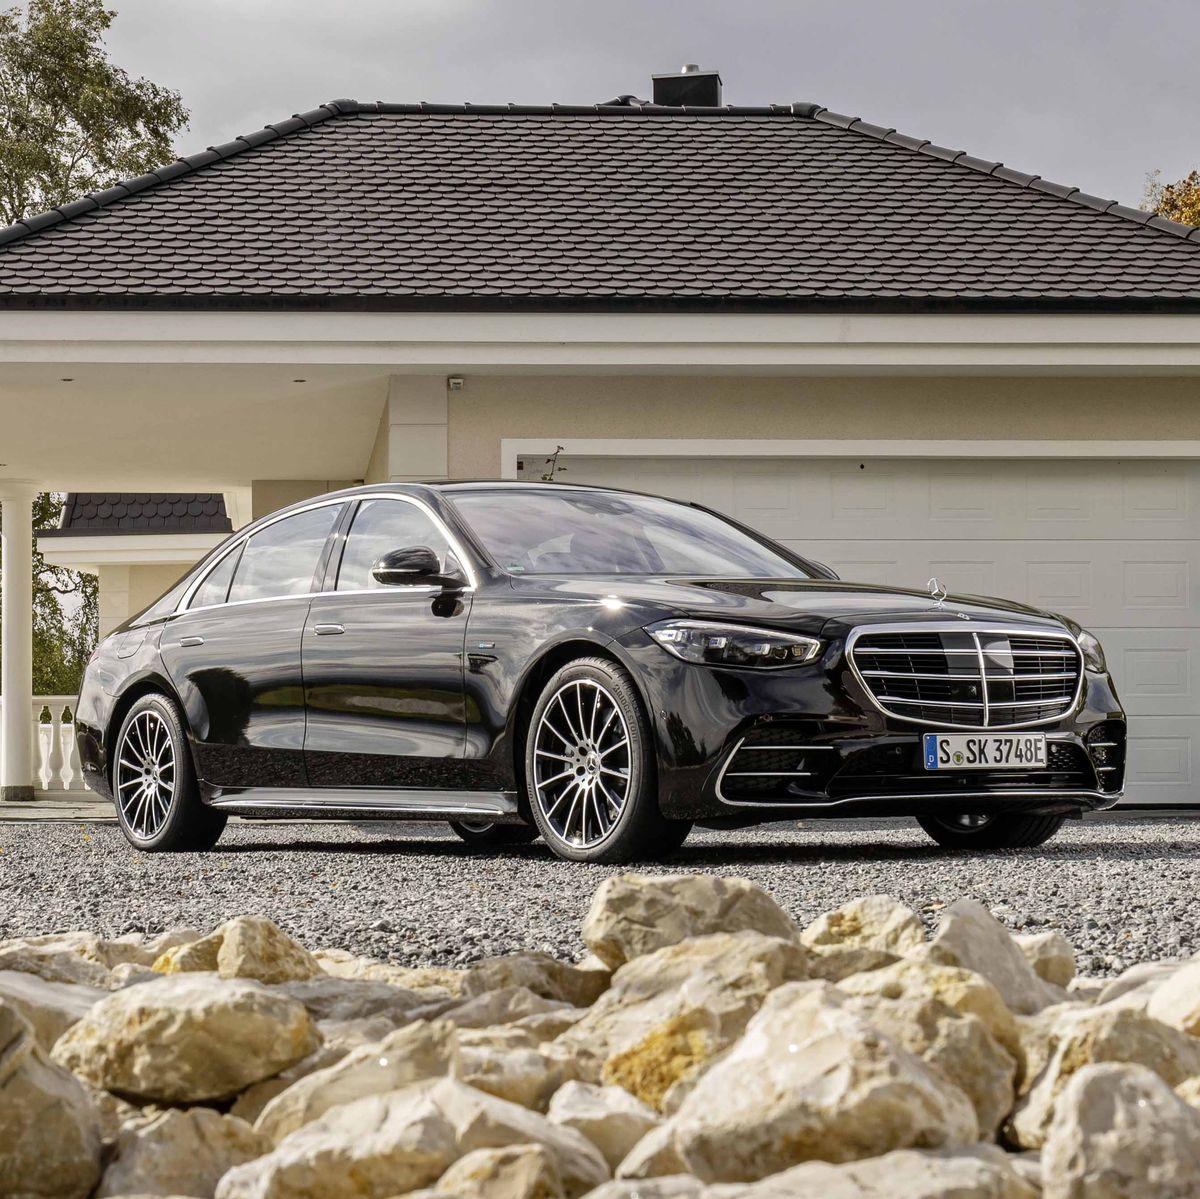 2023 Mercedes Benz S580e Is Cheaper and More Powerful Than the V 8